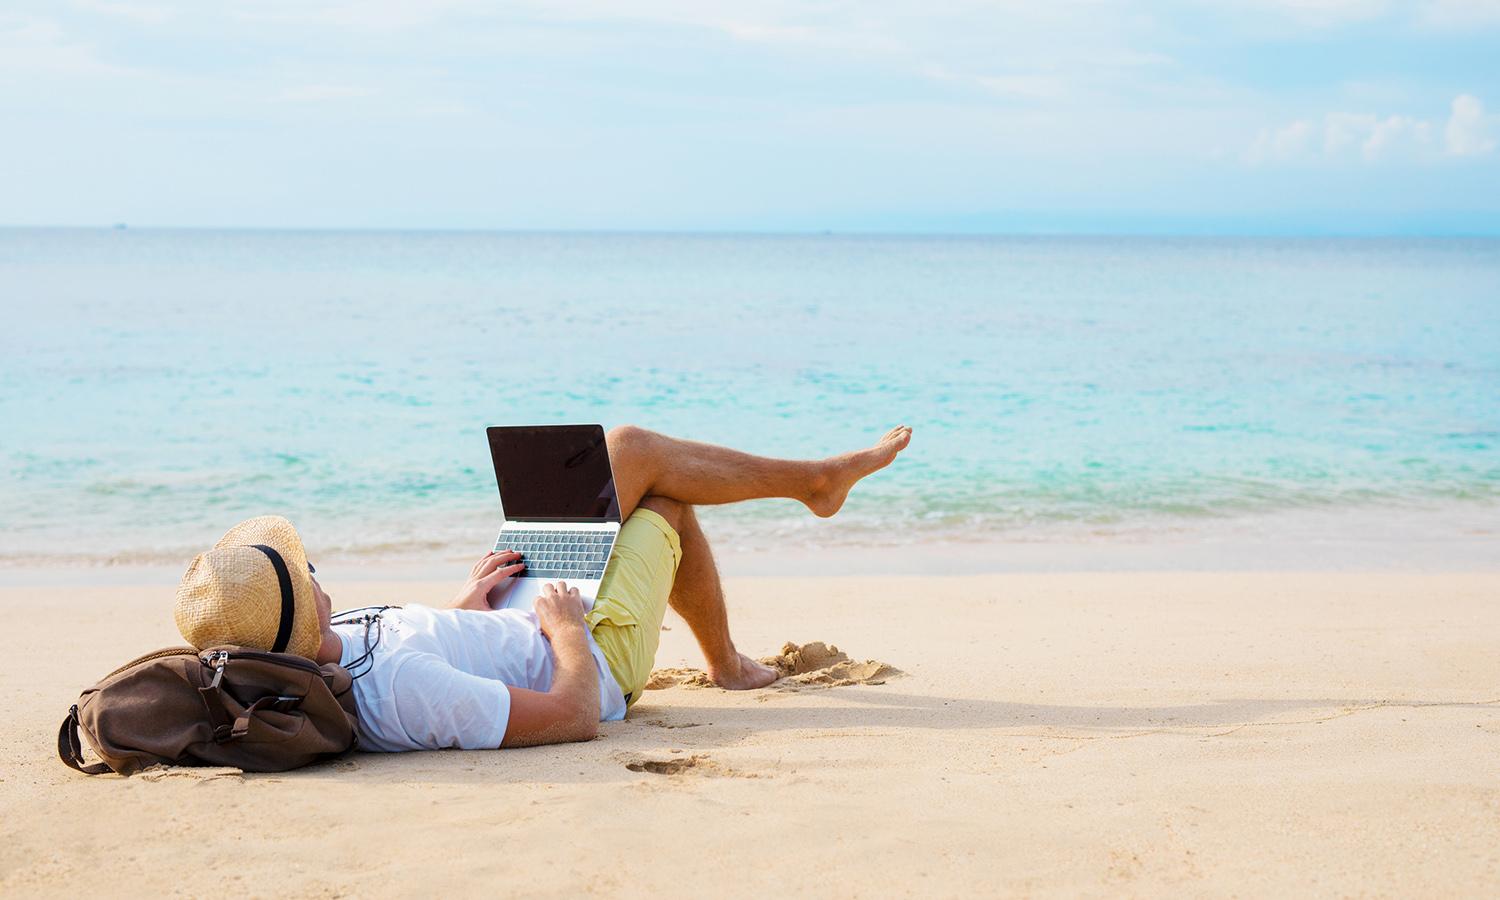 Summer is a good time to focus on doing less work, but with better focus, to improve security, says leadership columnist Michael Santarcangelo. (grinvalds/iStock via Getty Images)